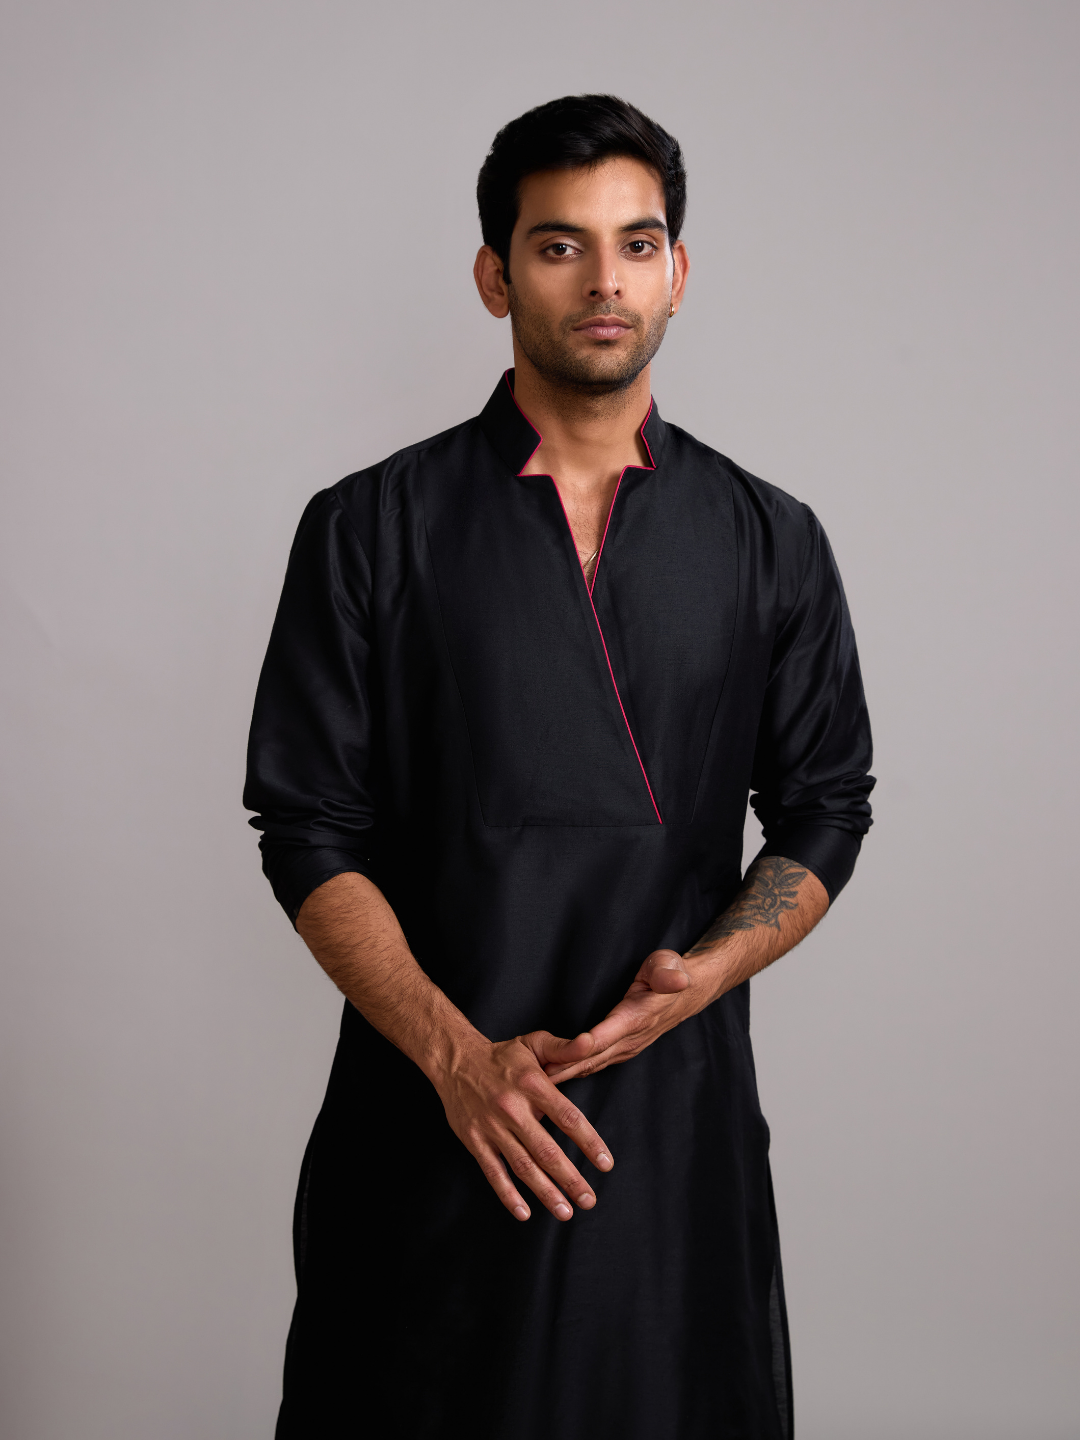 Classic collar straight kurta paired with pathani pants- Rich Black